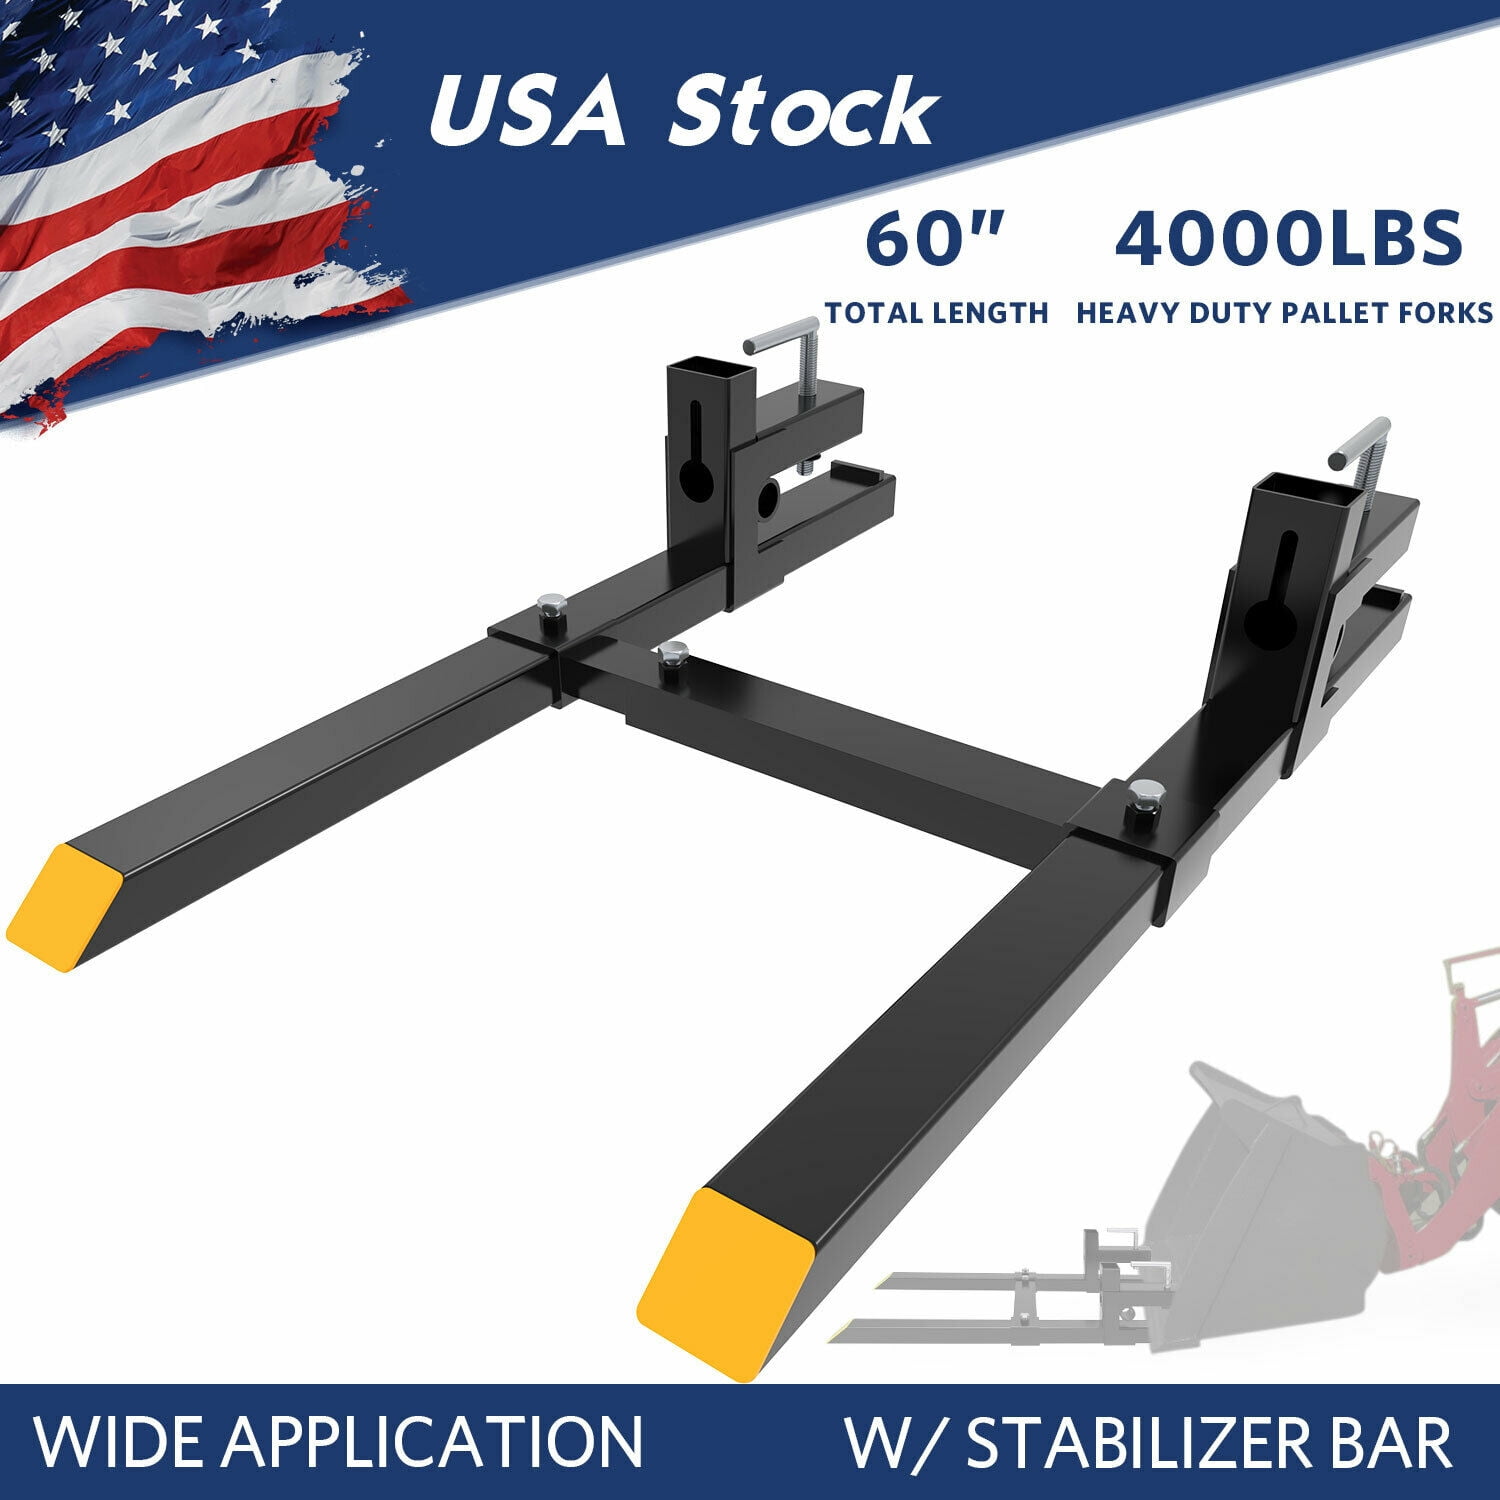 4000Lbs Tractor Pallet Forks for John Deere Tractors Skid Steer Bucket,60 Quick Attach With Stabilizer Bar 